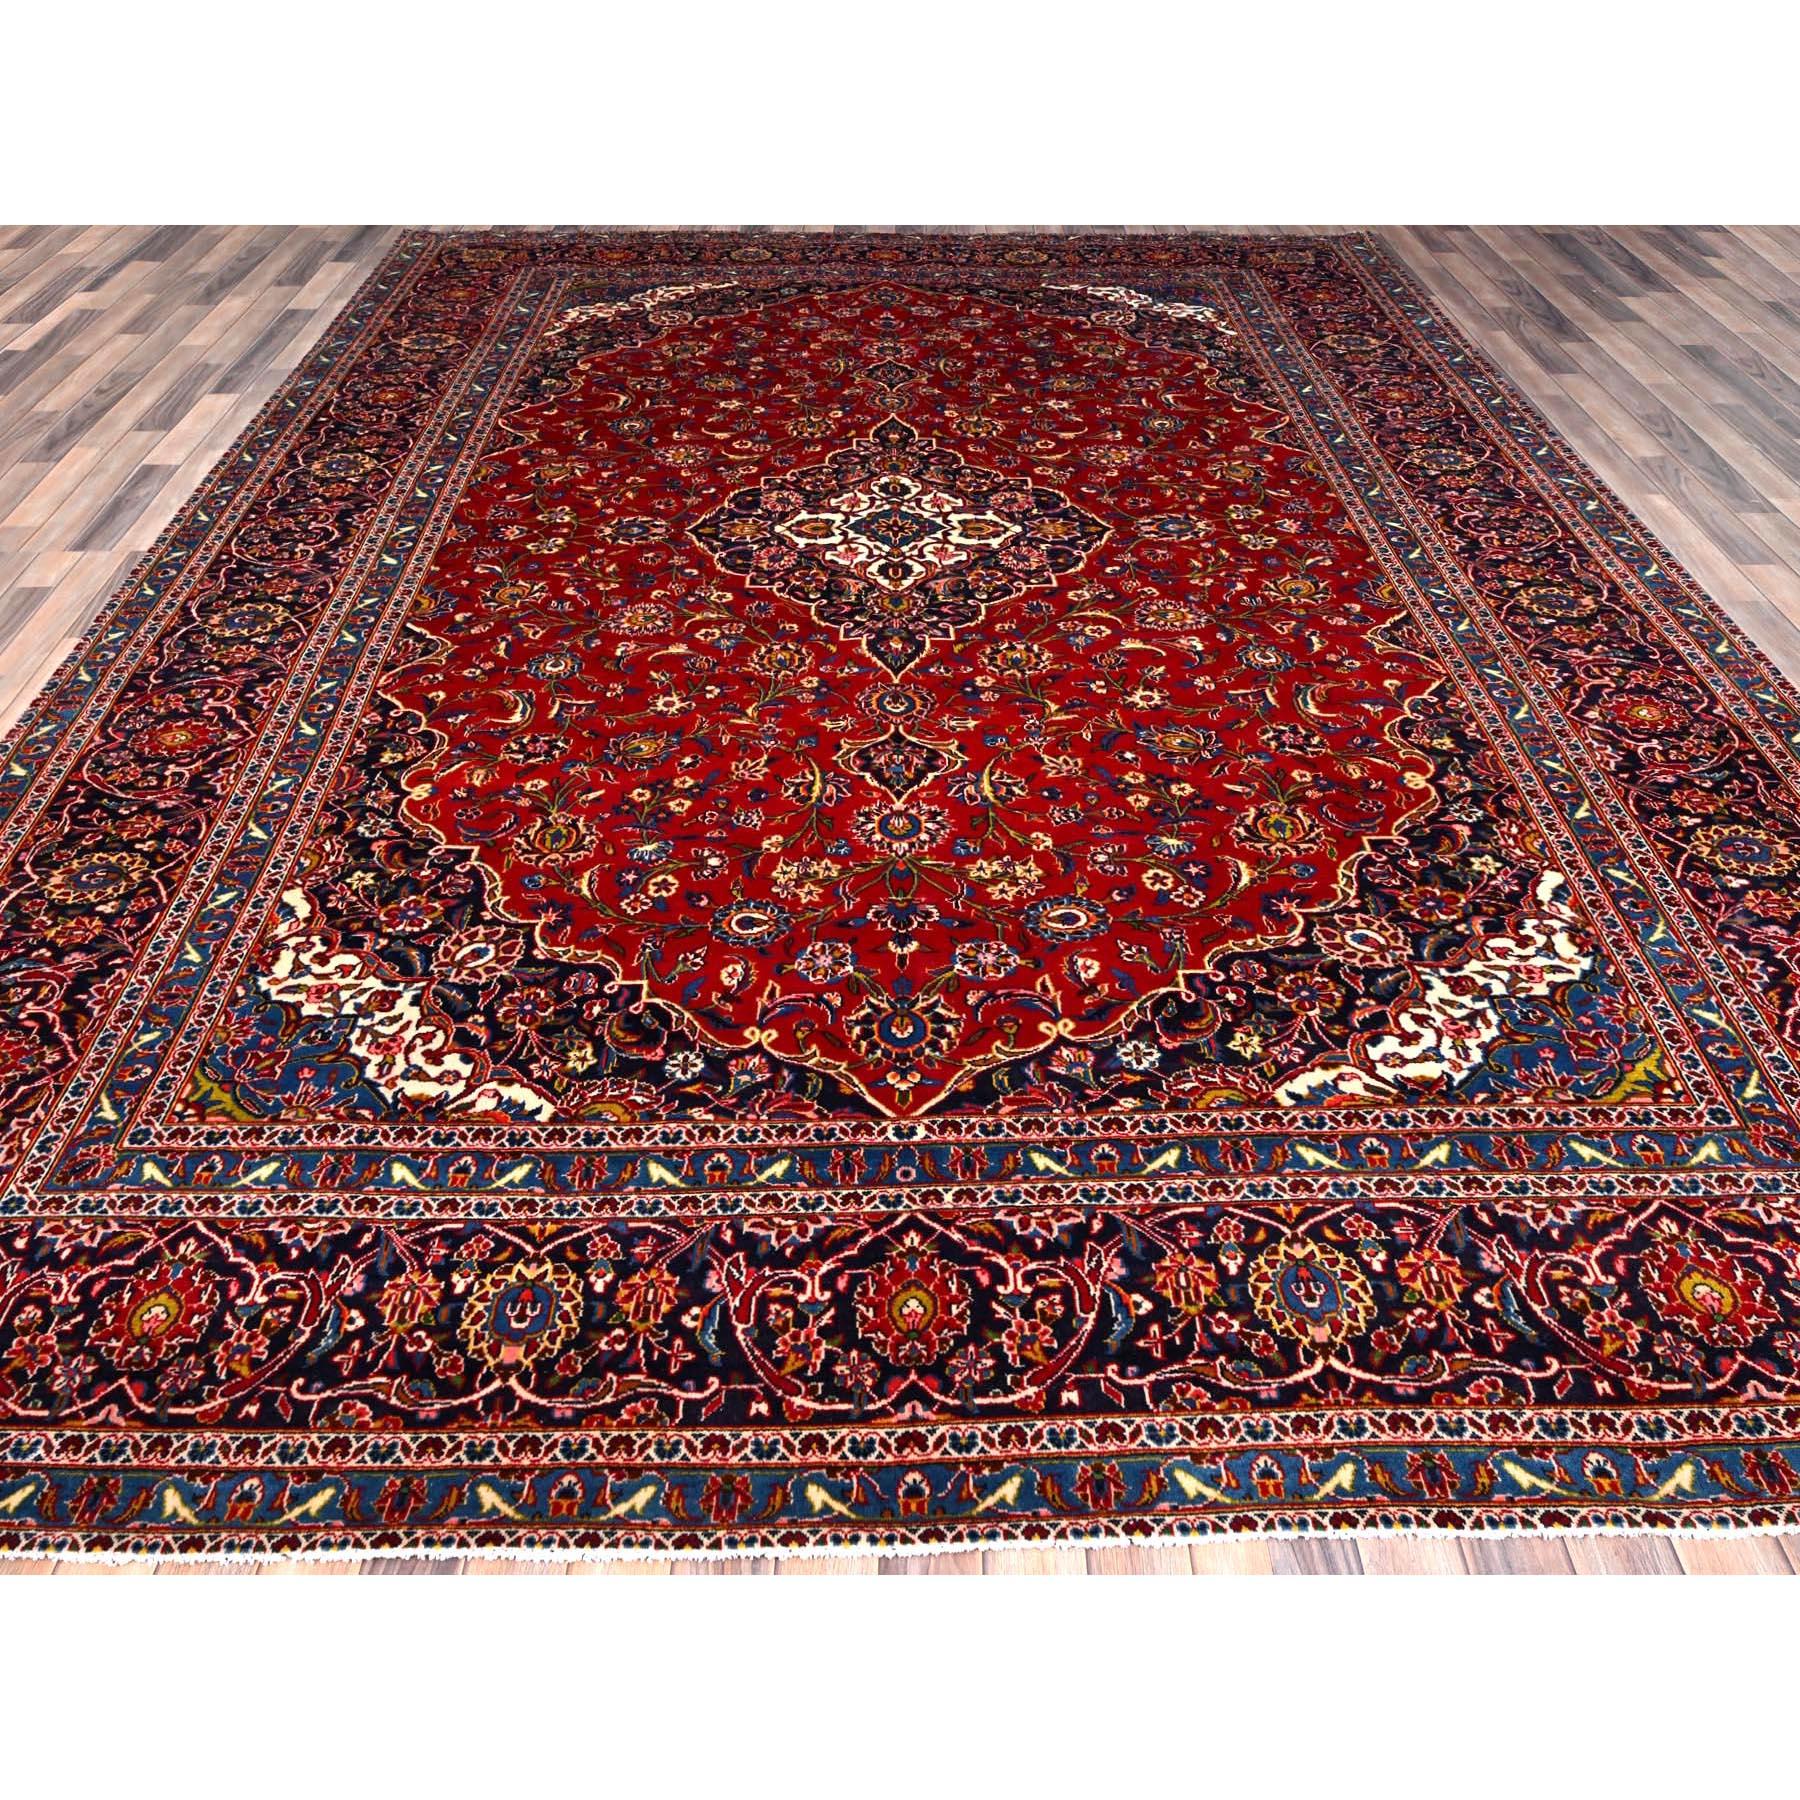 Medieval Red Pure Wool Vintage Persian Kashan Medallion Design 200 KPSI Hand Knotted Rug For Sale